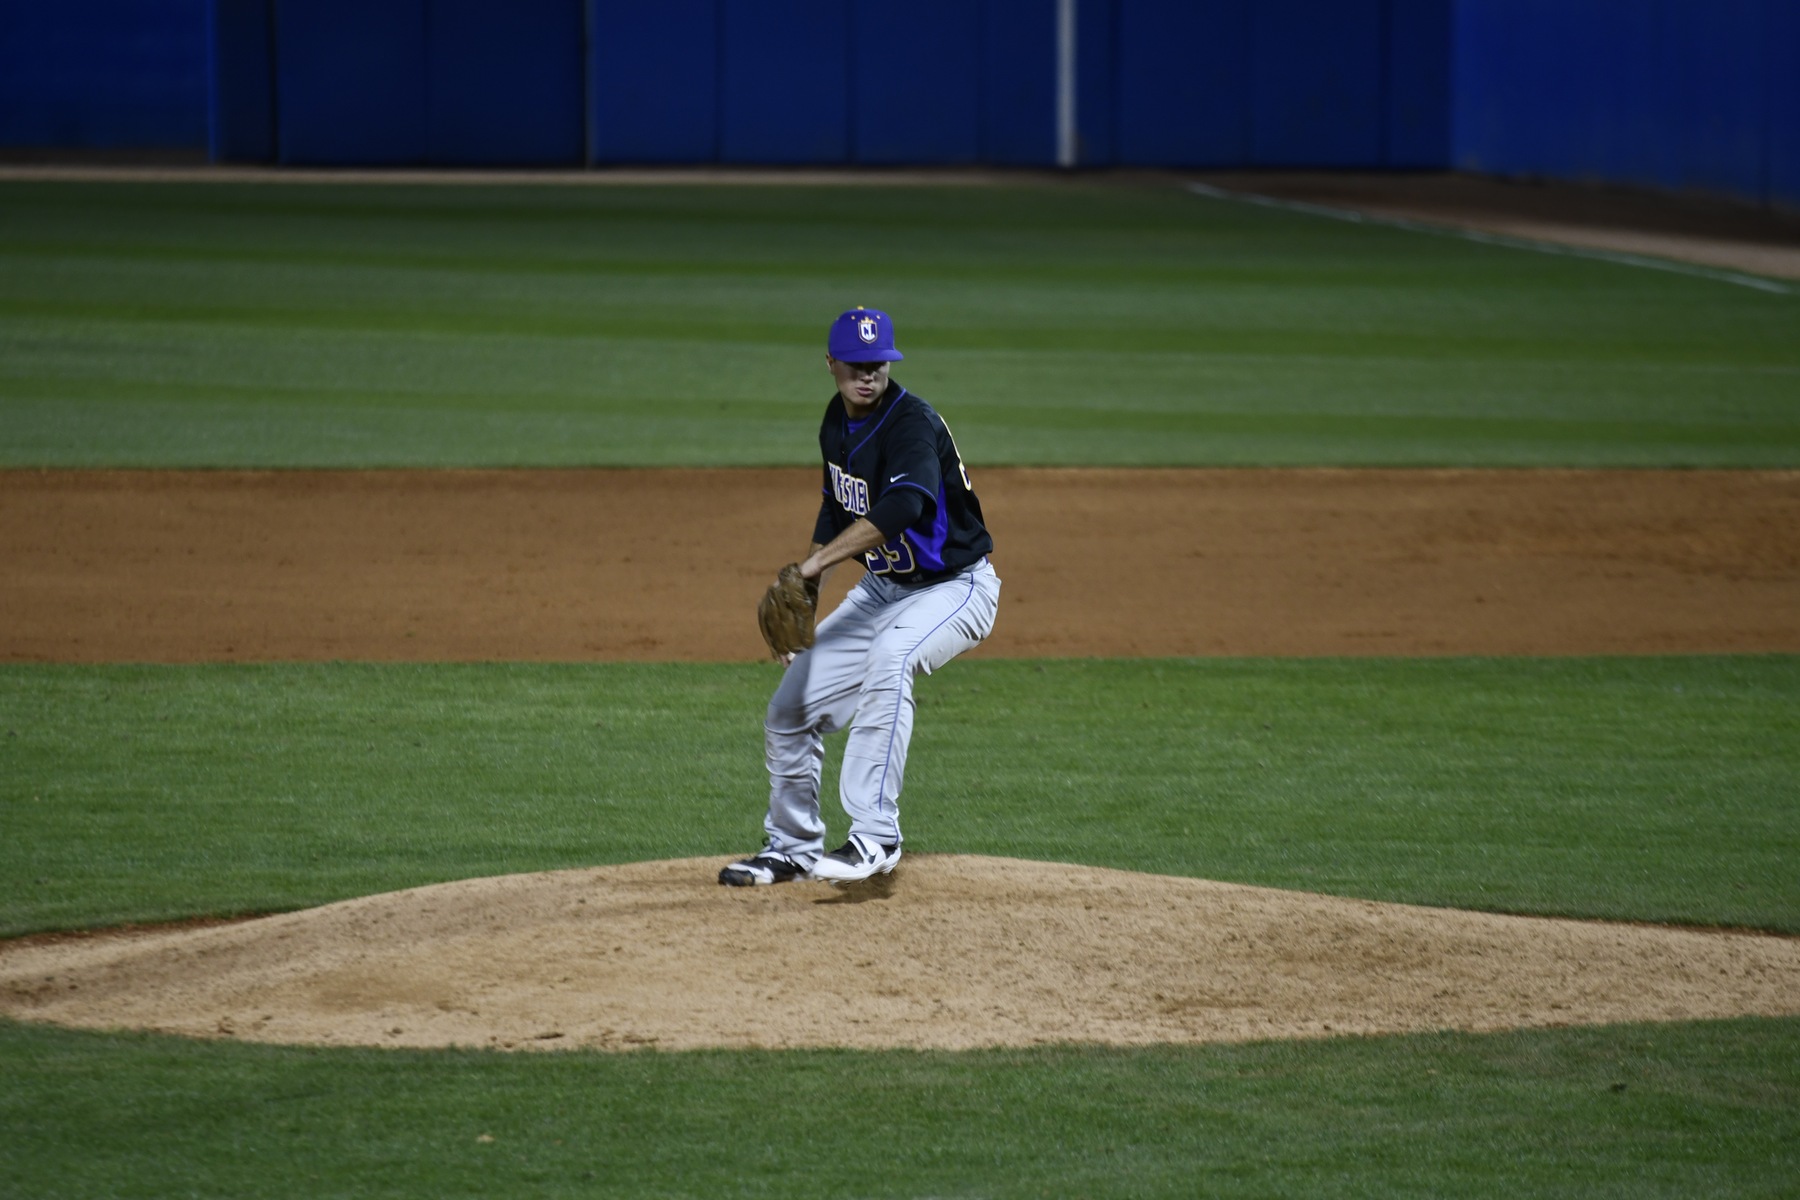 Troy Frazier threw six innings of shutout baseball while racking up 11 strikeouts.